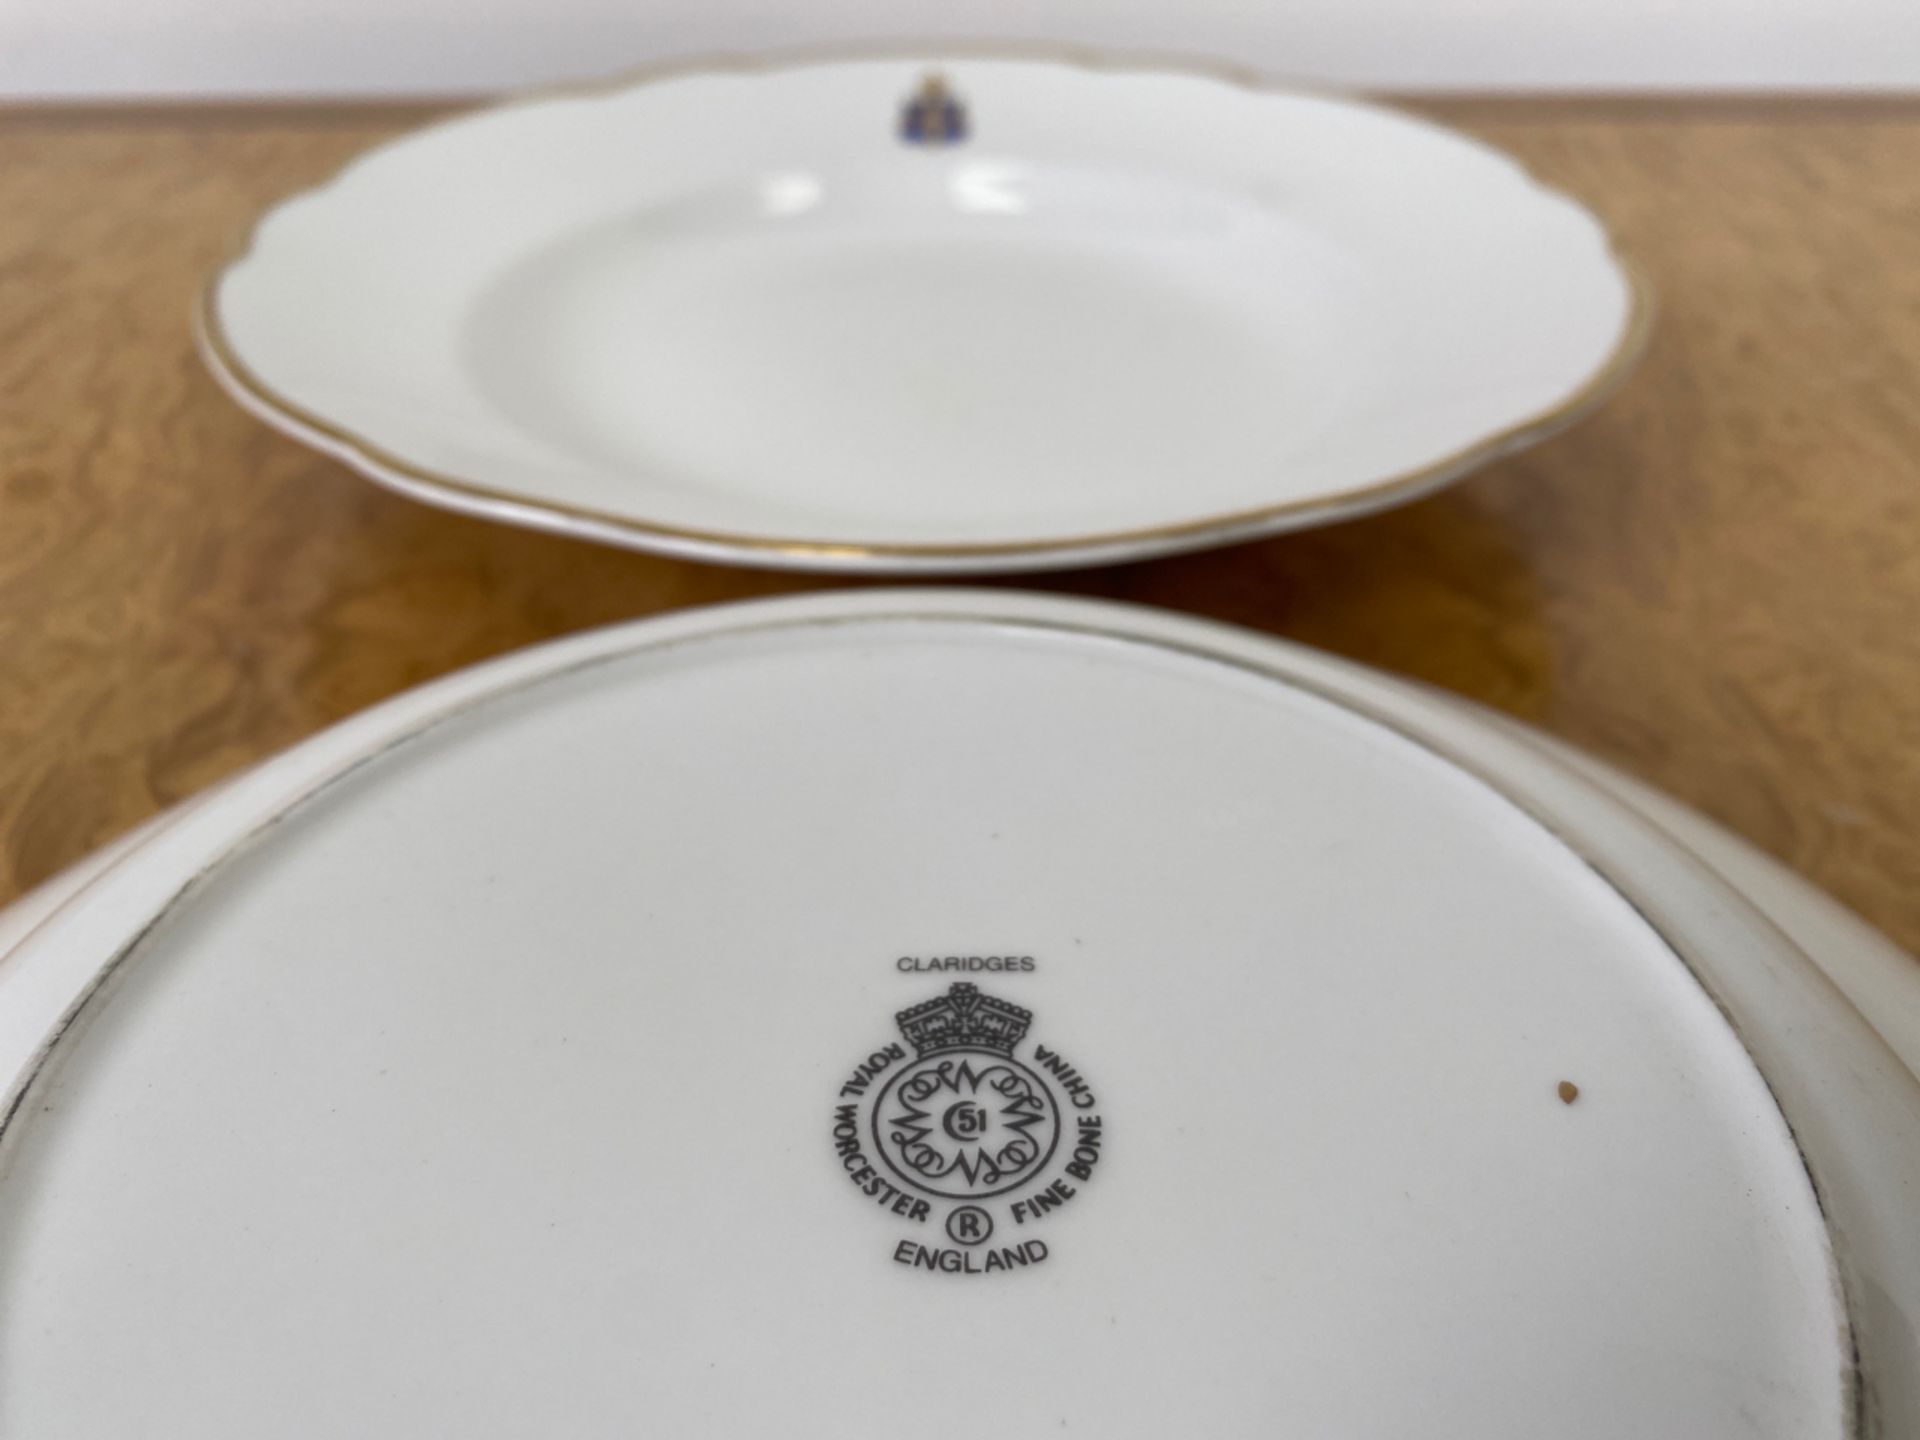 Set of Crested Crockery for Claridge's by Chommette 1884 - Image 33 of 36